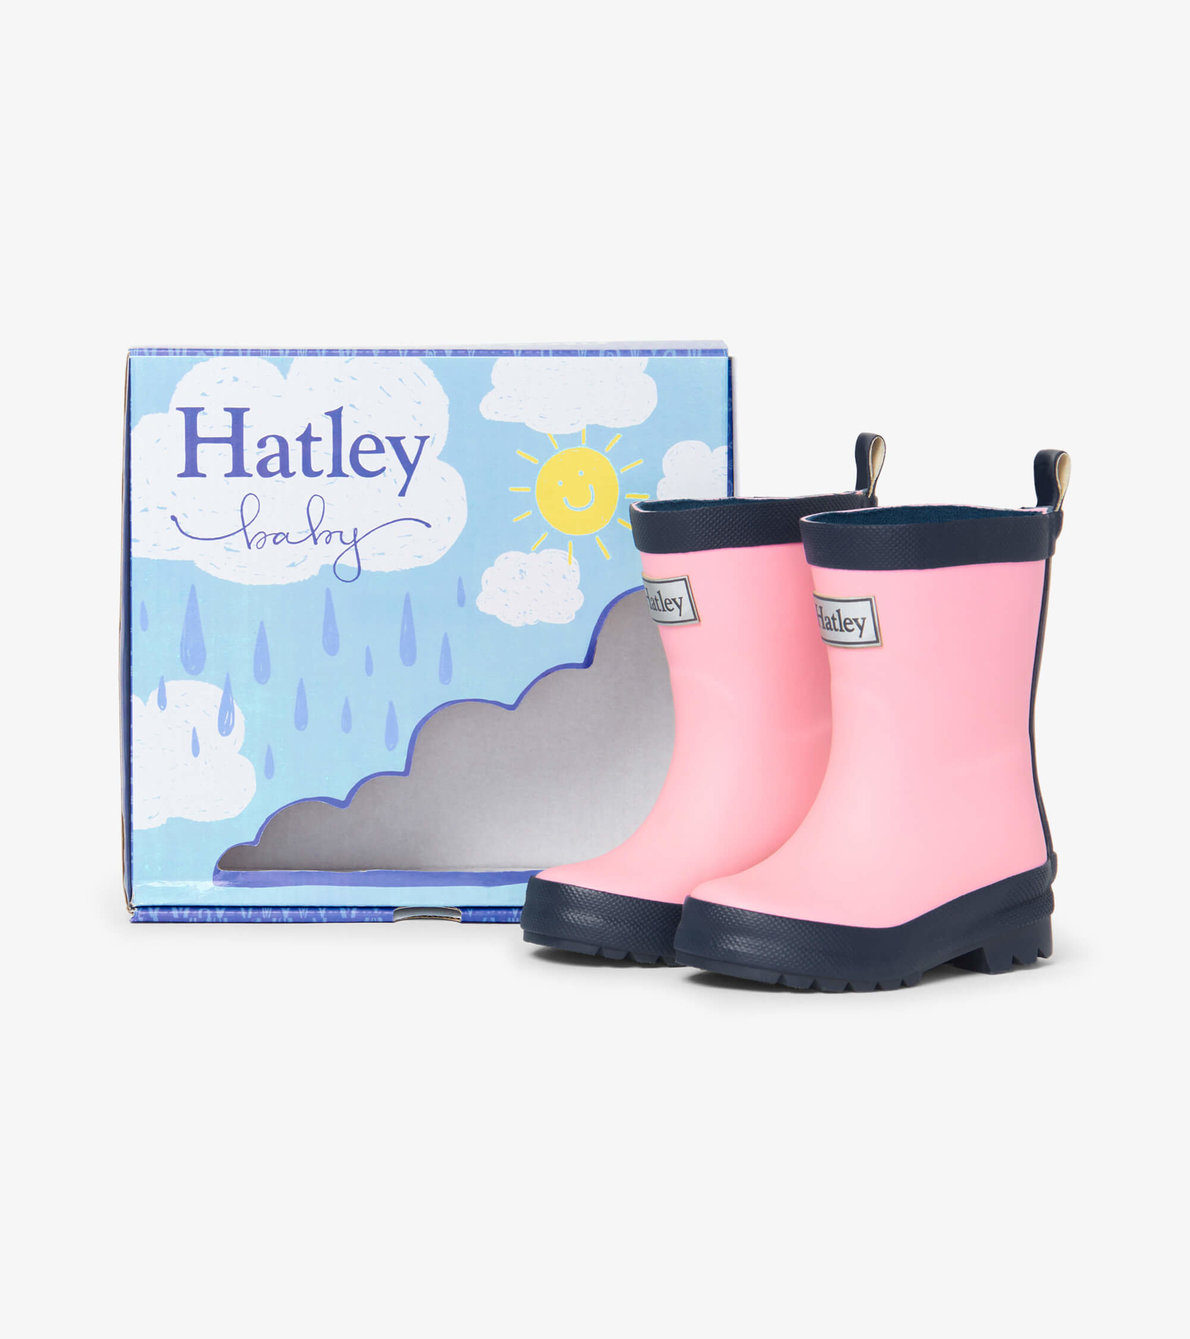 View larger image of Baby Pink & Navy Matte Wellies